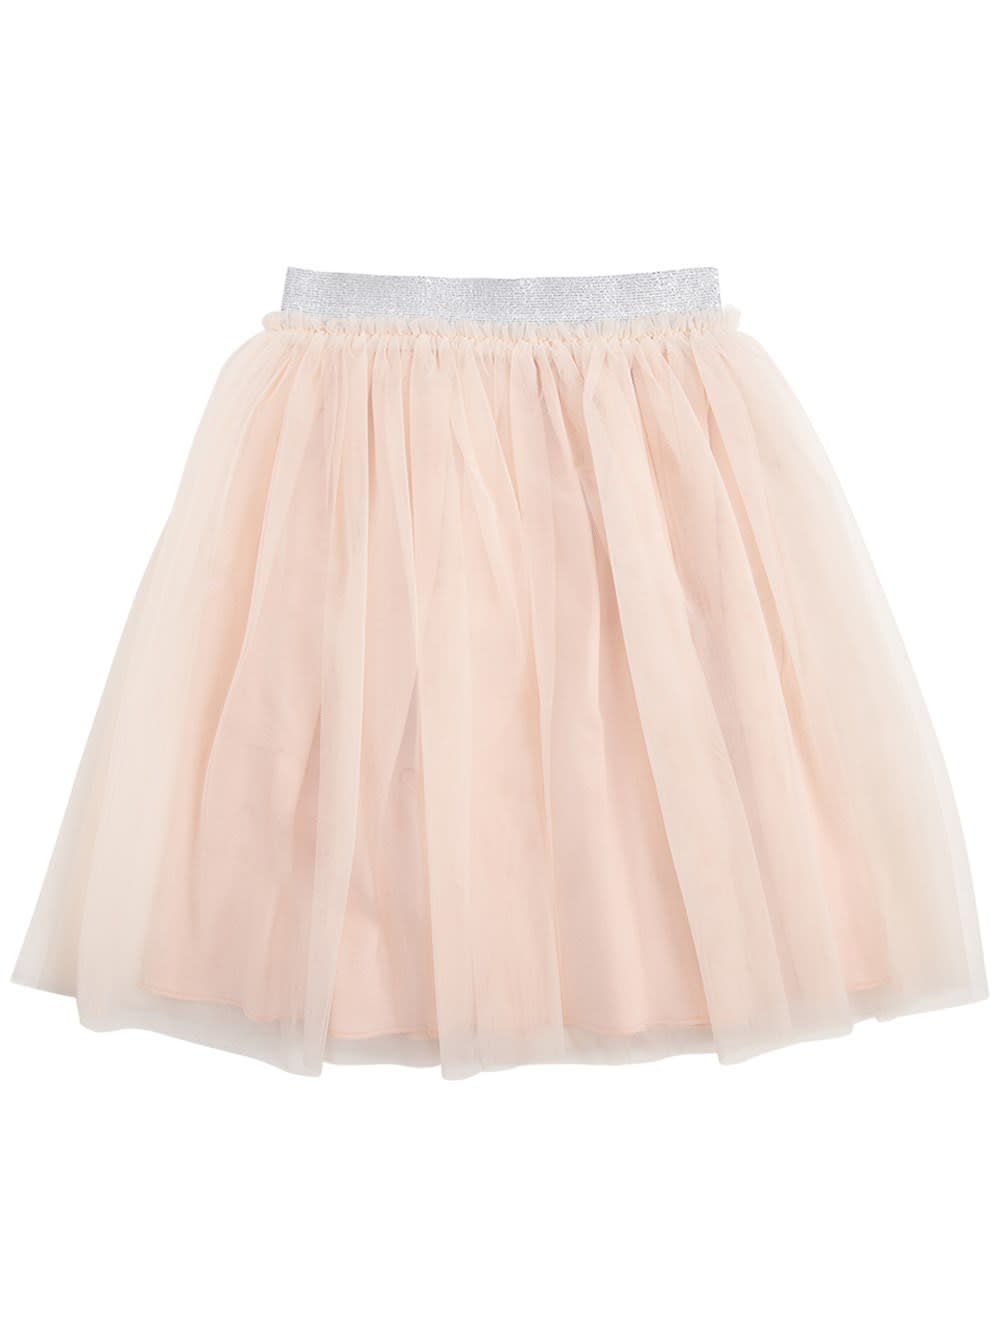 Il Gufo Pink Tulle Skirt